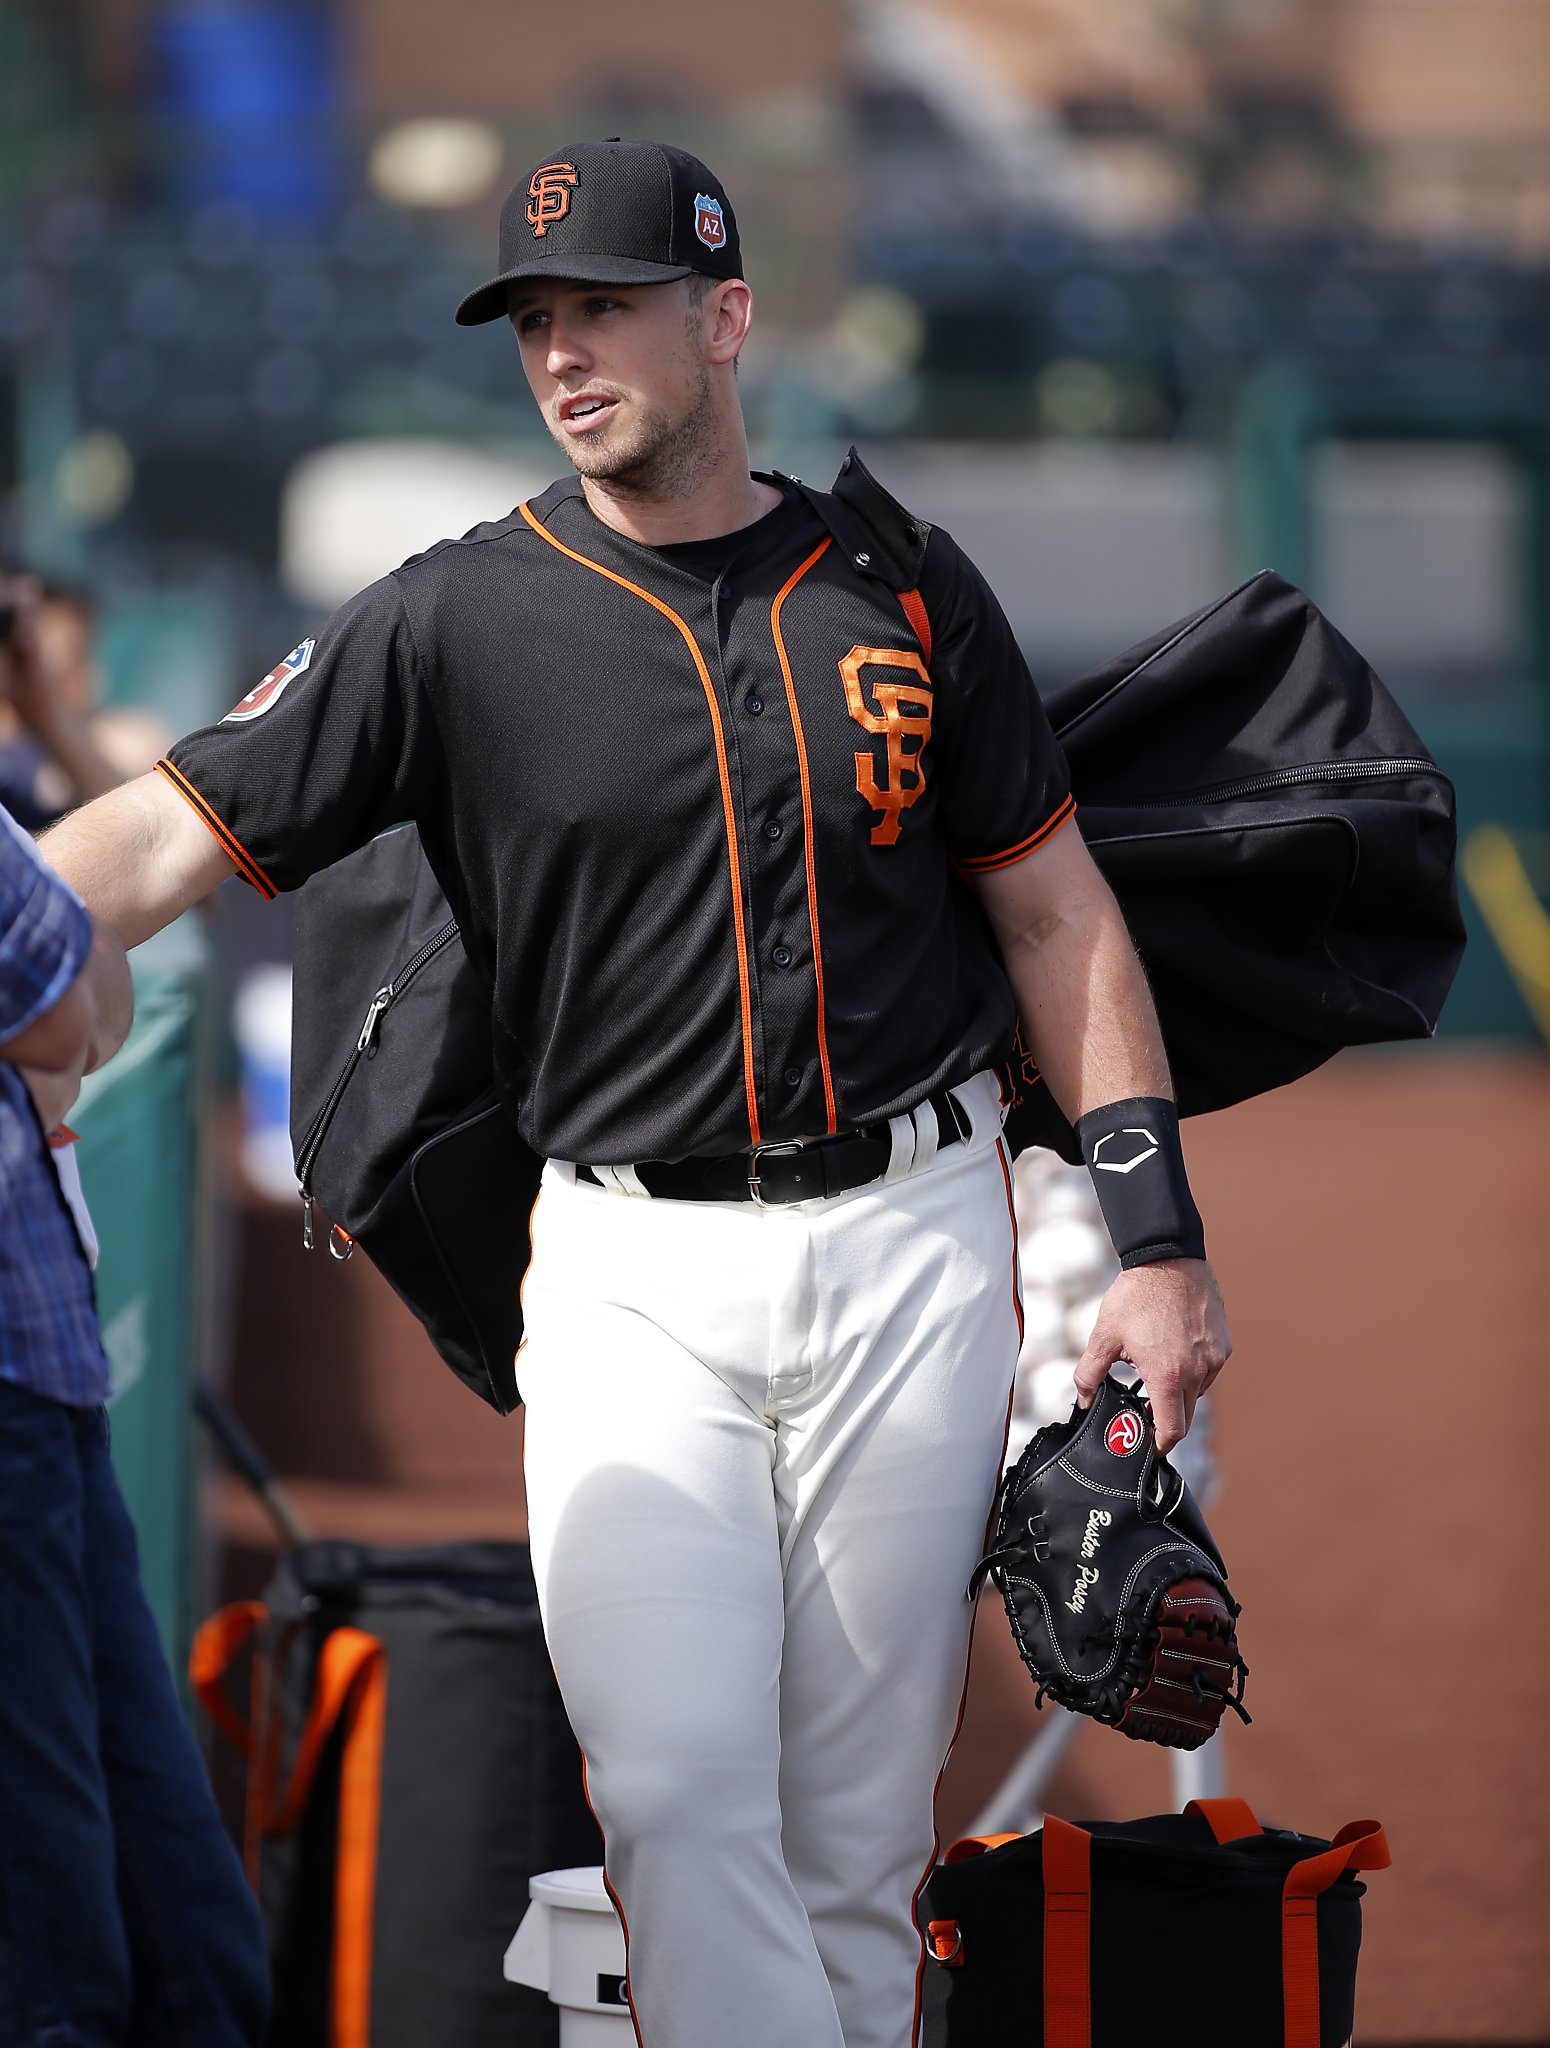 Buster Posey adorably tests the limits of his acting ability in